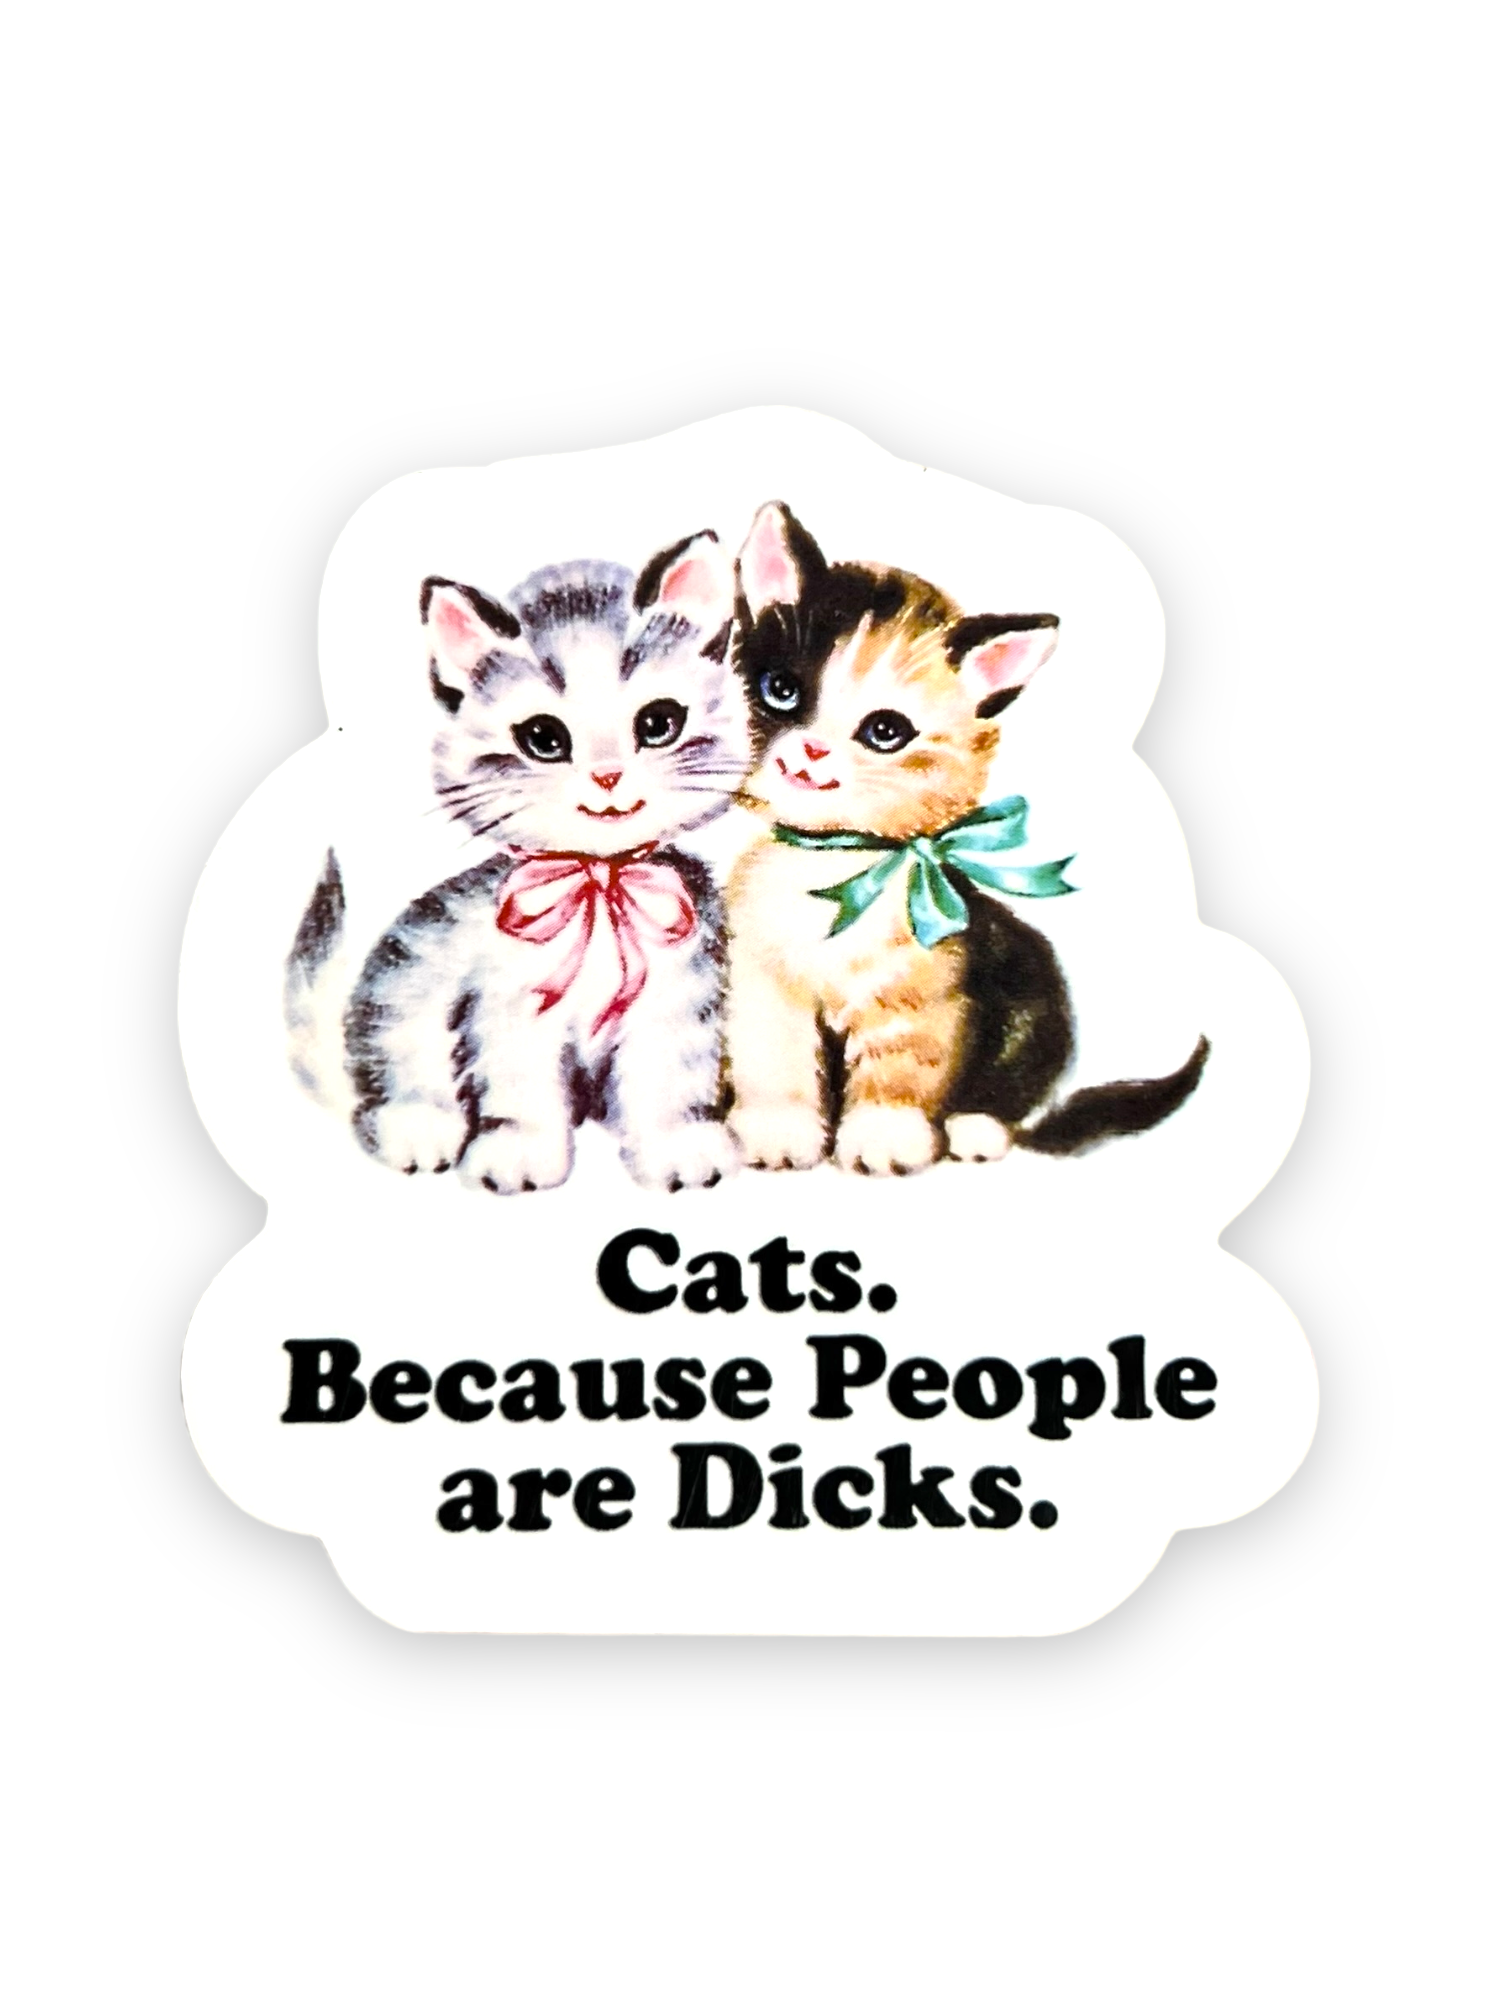 Cats Because People Are Dicks Sticker by Ace the Pitmatian Sold by Le Monkey House